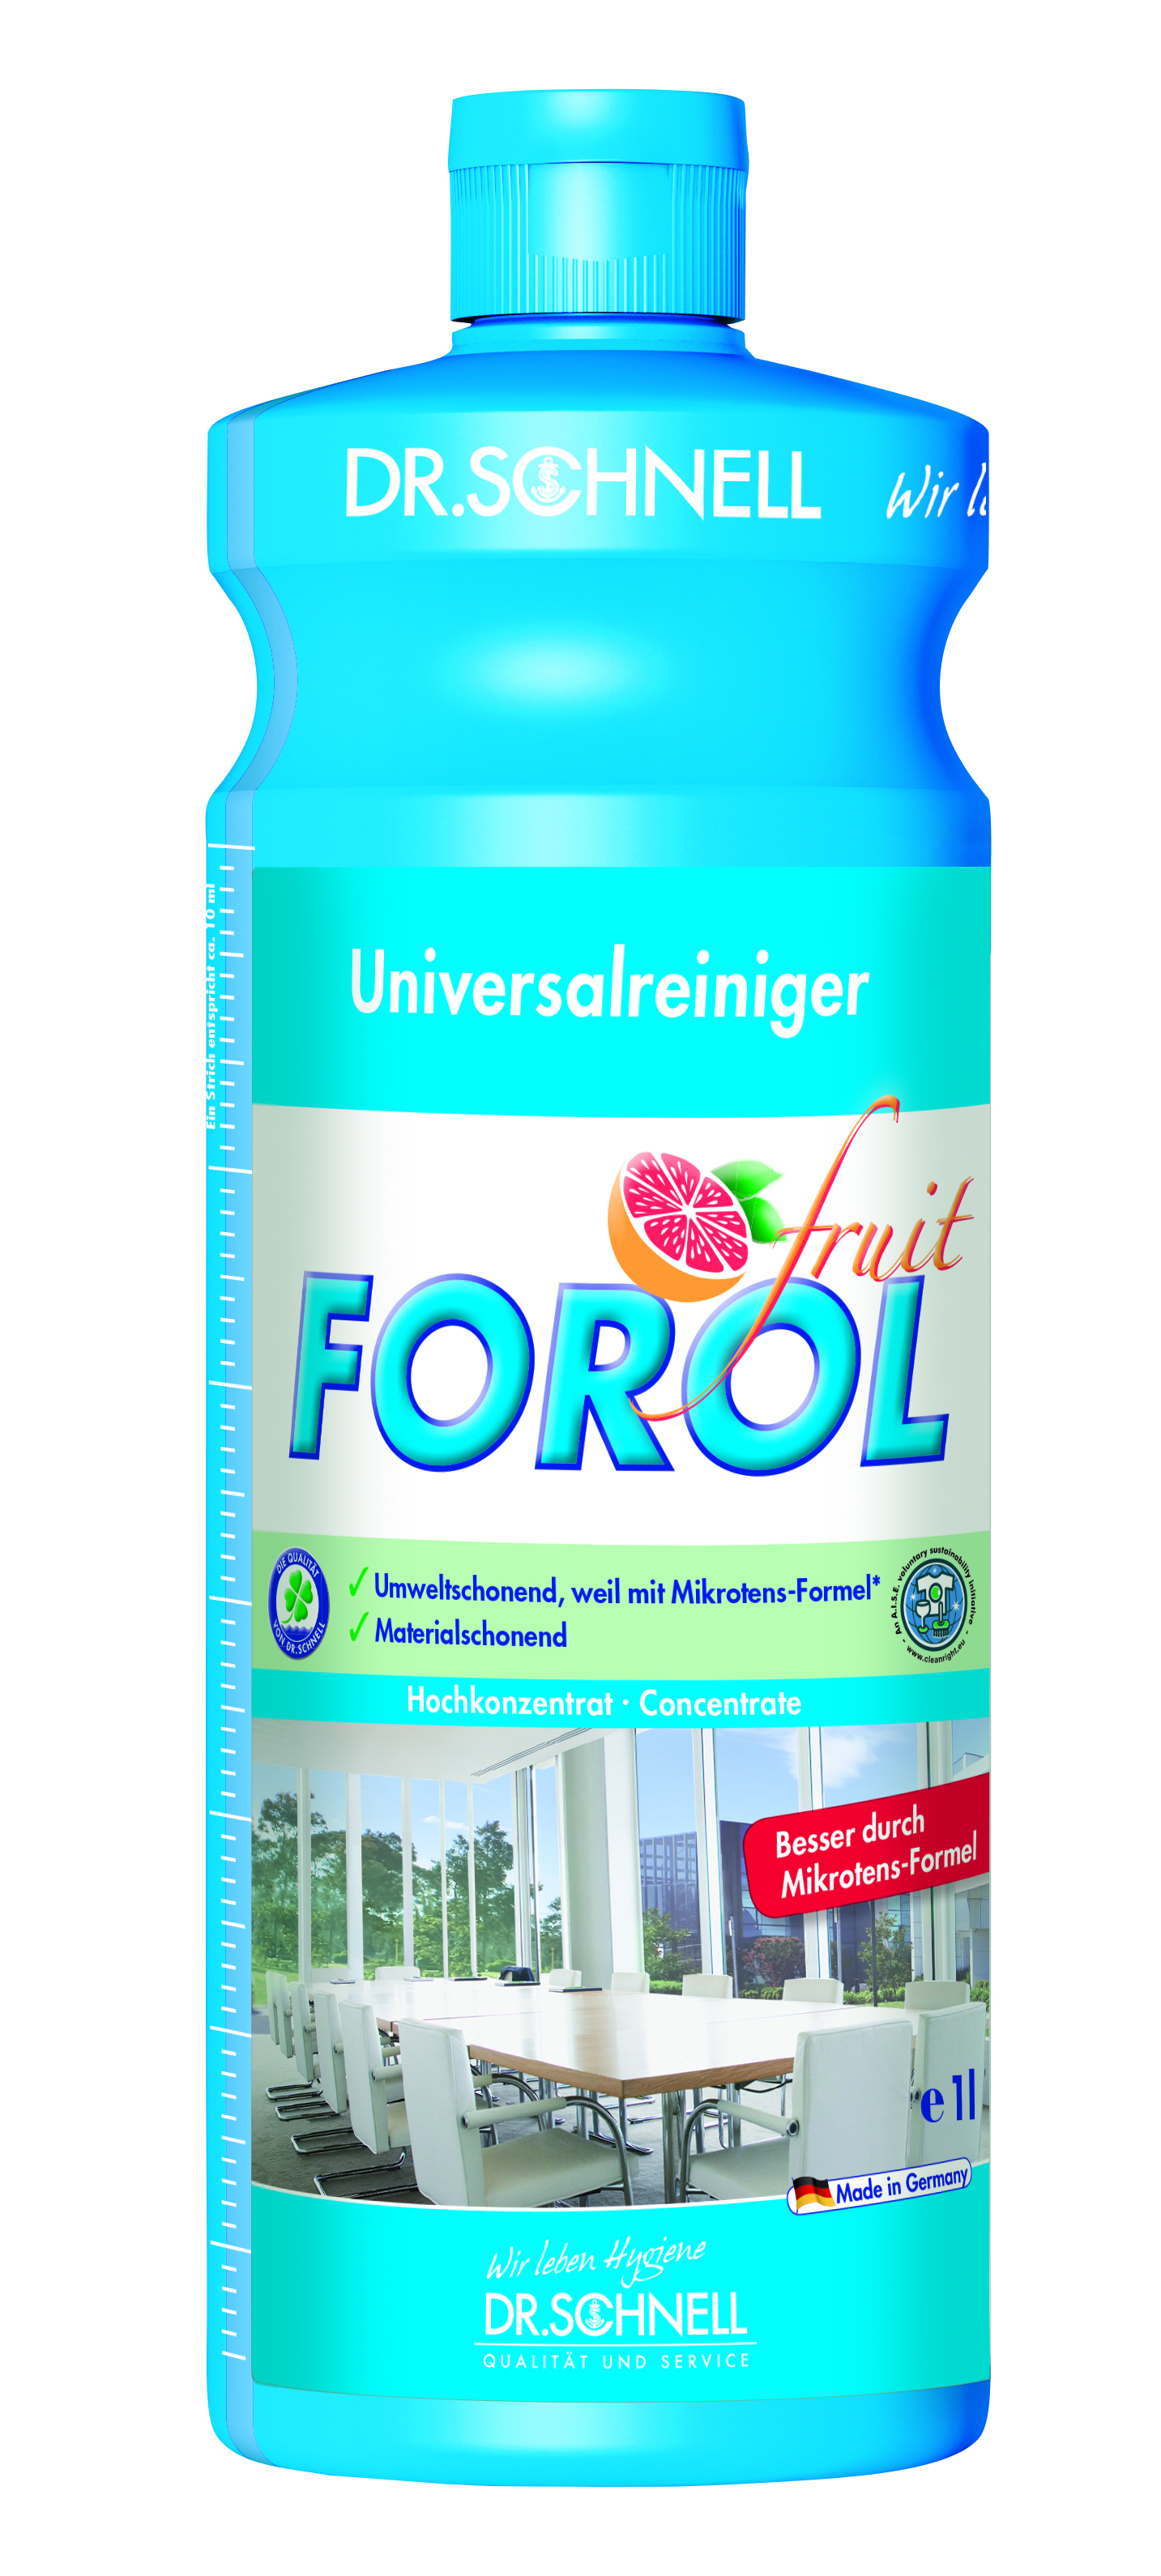 Dr. Schnell Forol Fruit  12 x 1 l